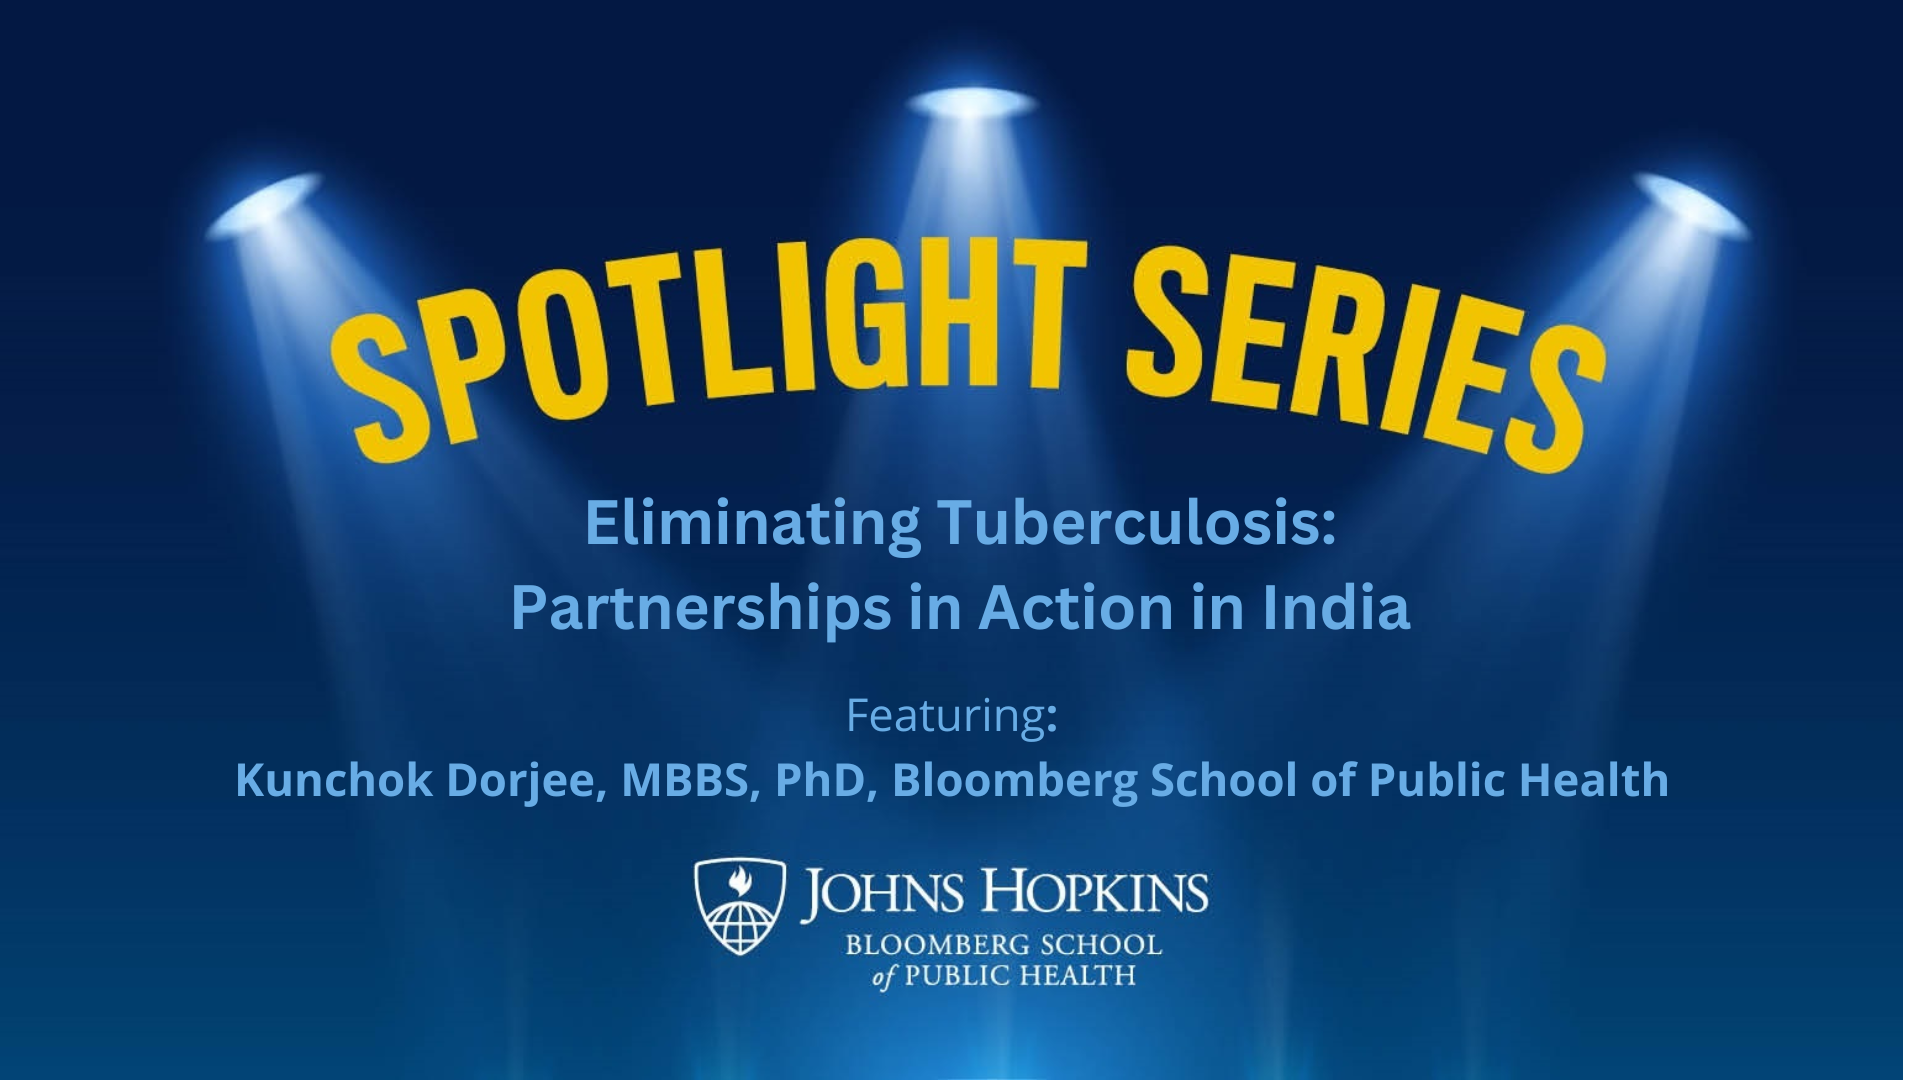 Eliminating Tuberculosis: Partnerships in Action in India